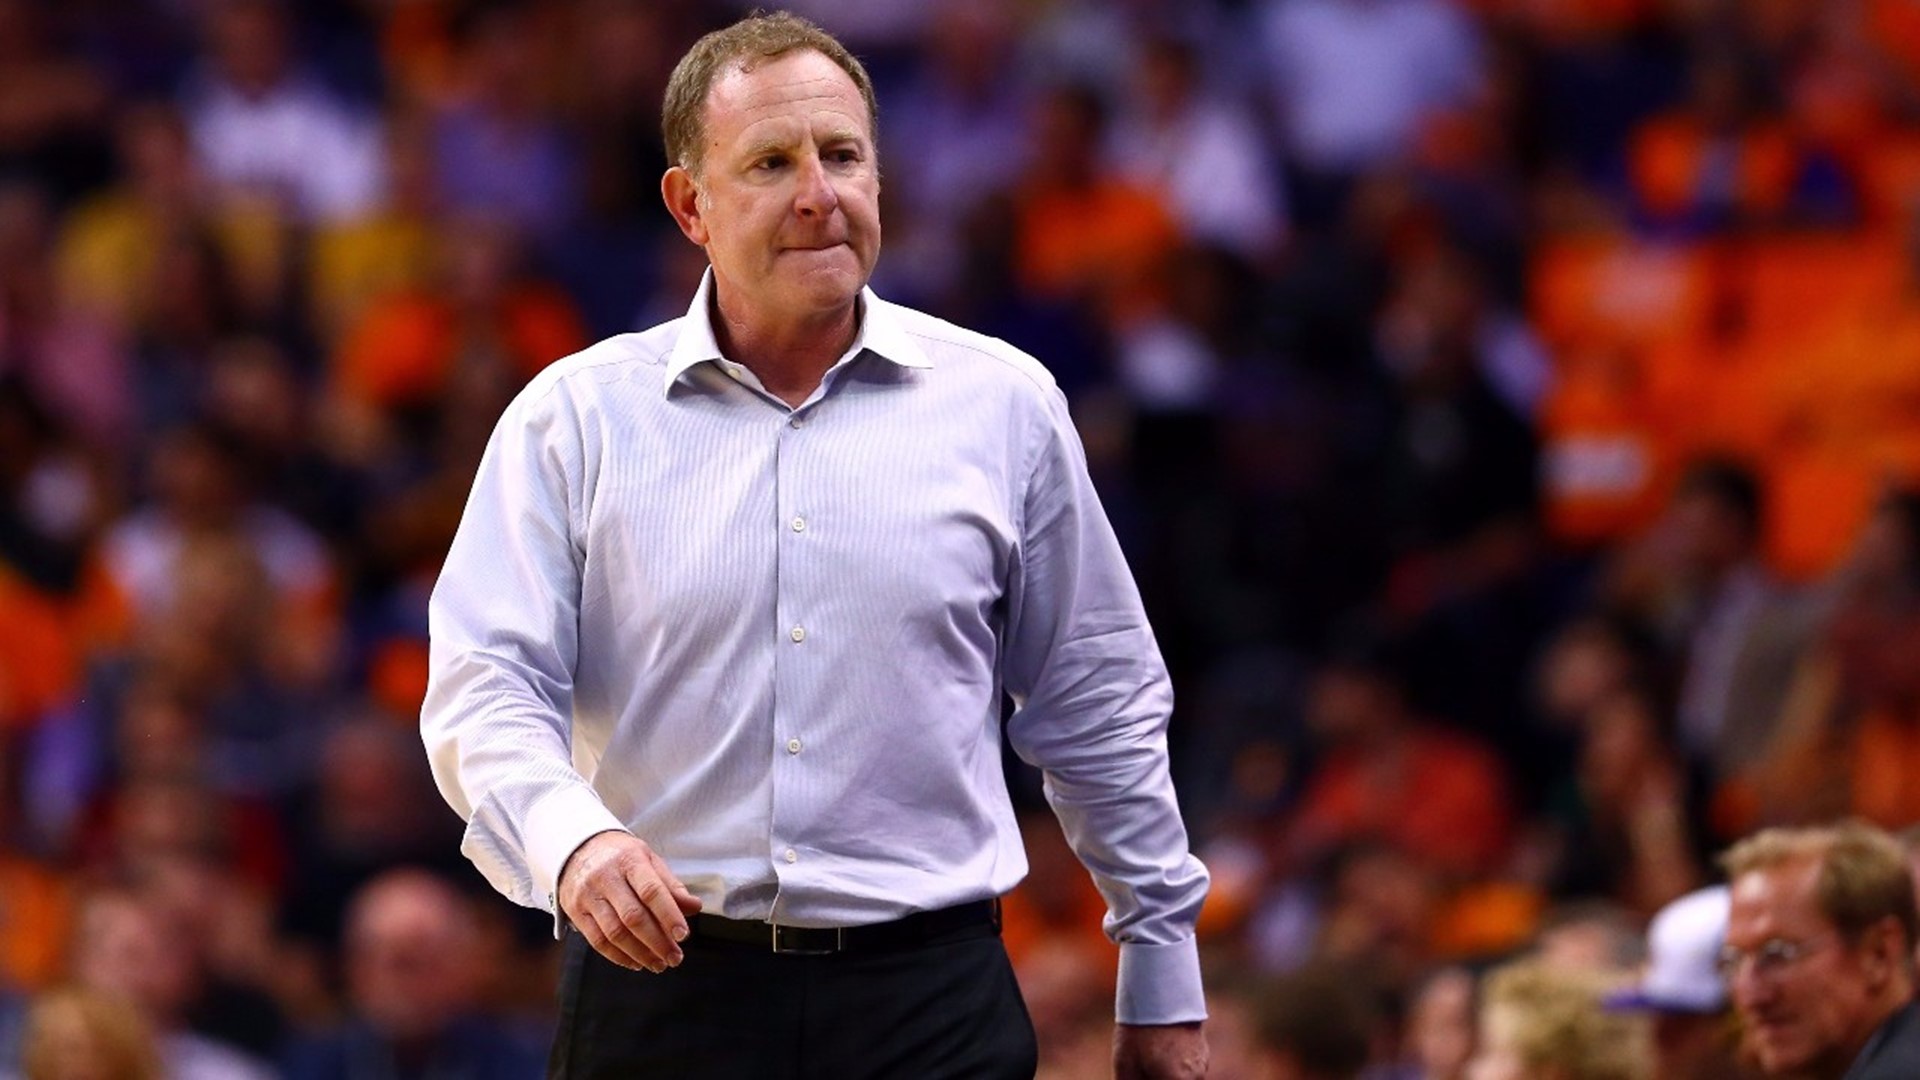 Phoenix Suns owner Robert Sarver said Friday he's "shocked" ESPN is planning to release a report detailing allegations against him involving sexual harassment.